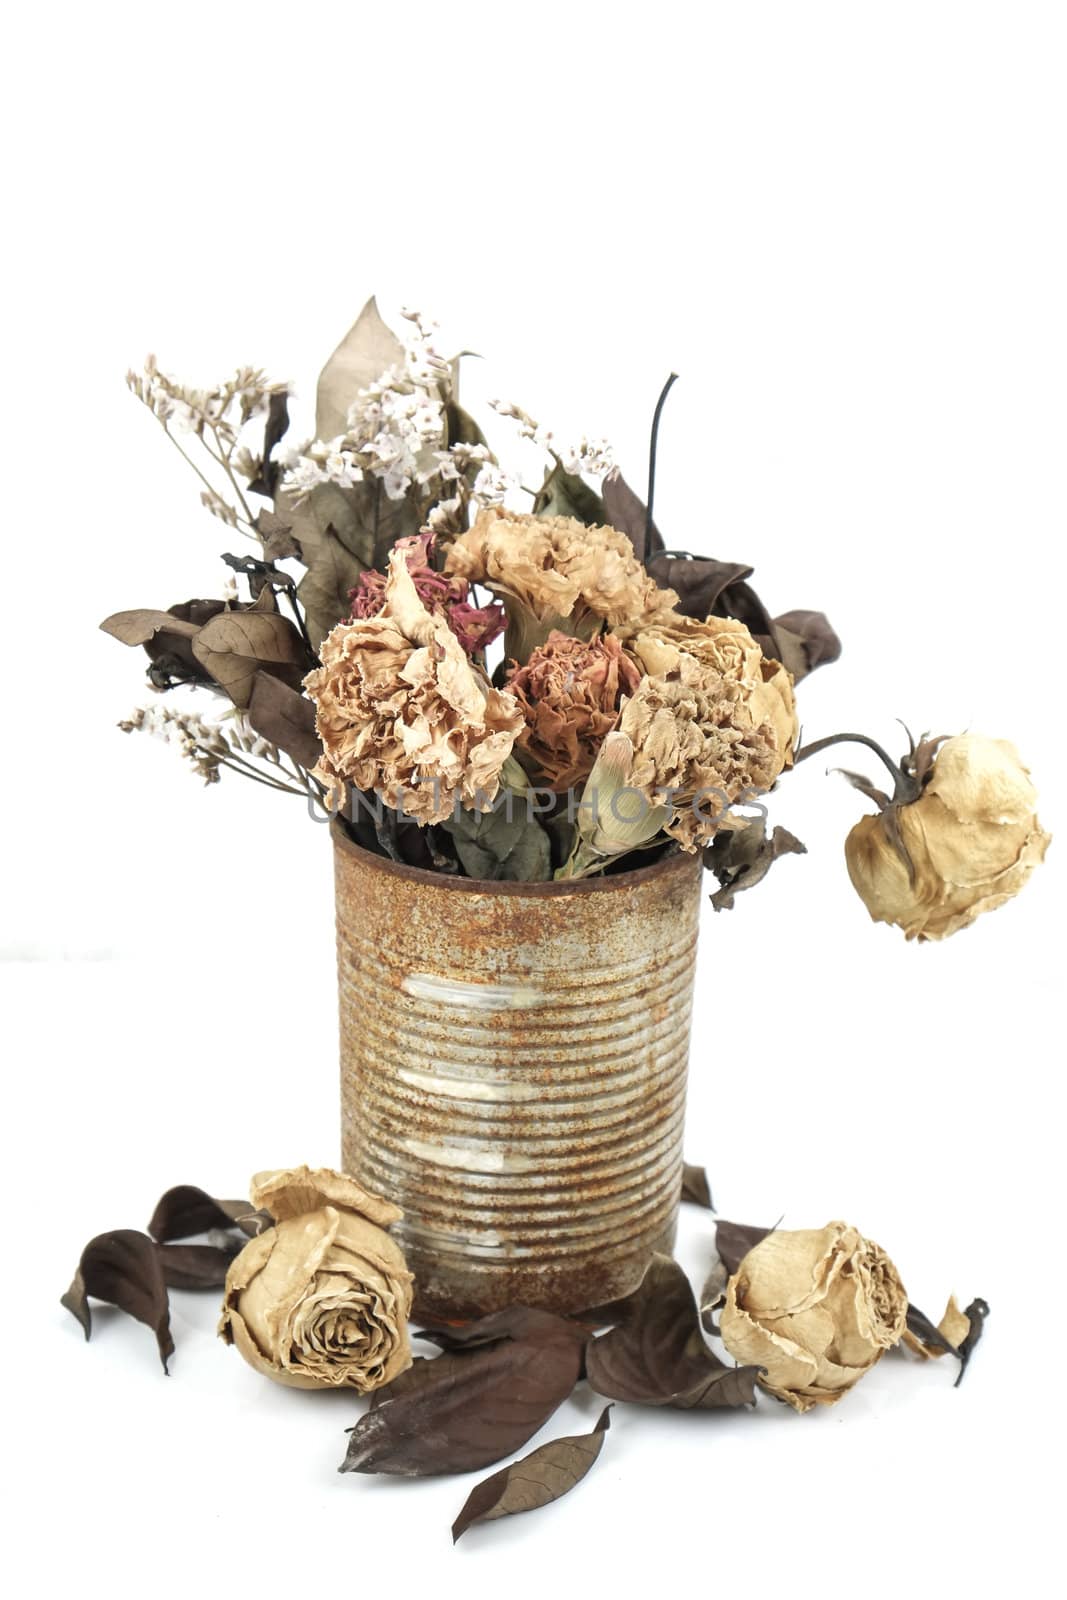 dry flowers in tin can by chayathonwong